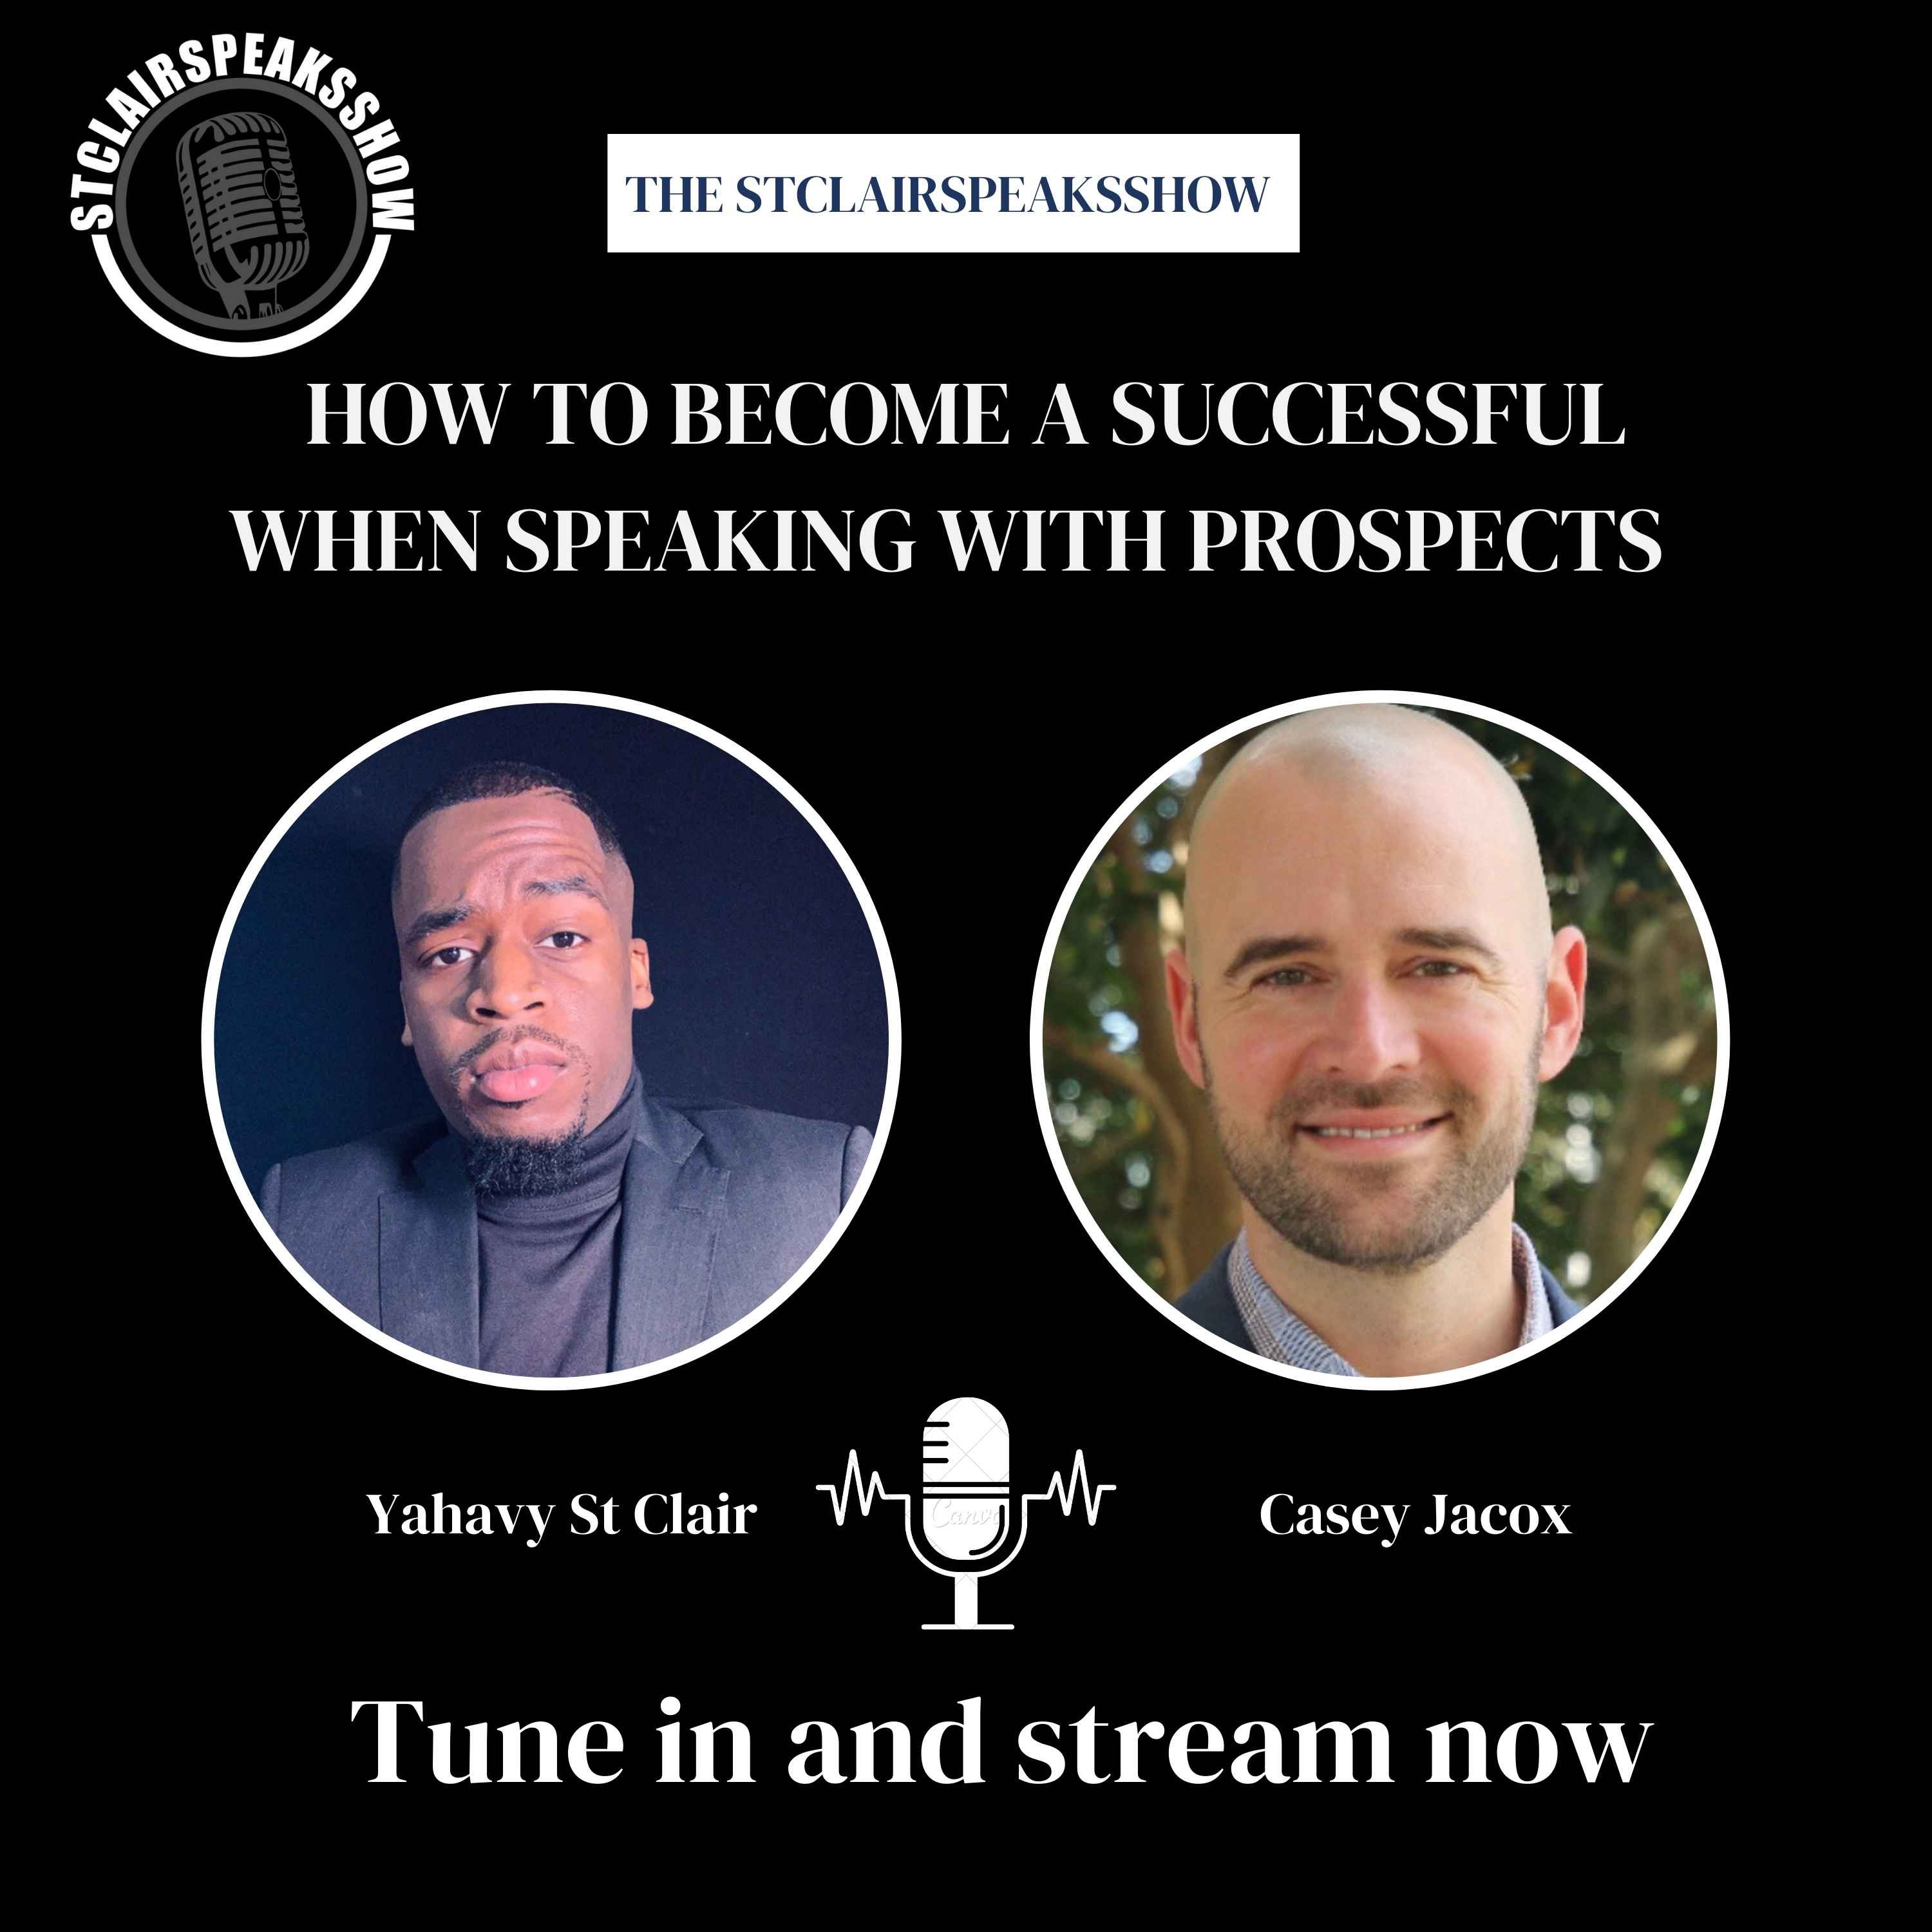 The StclairclairSpeaksShow Featuring Casey Jacox founder of Winning The Relationship, LLC